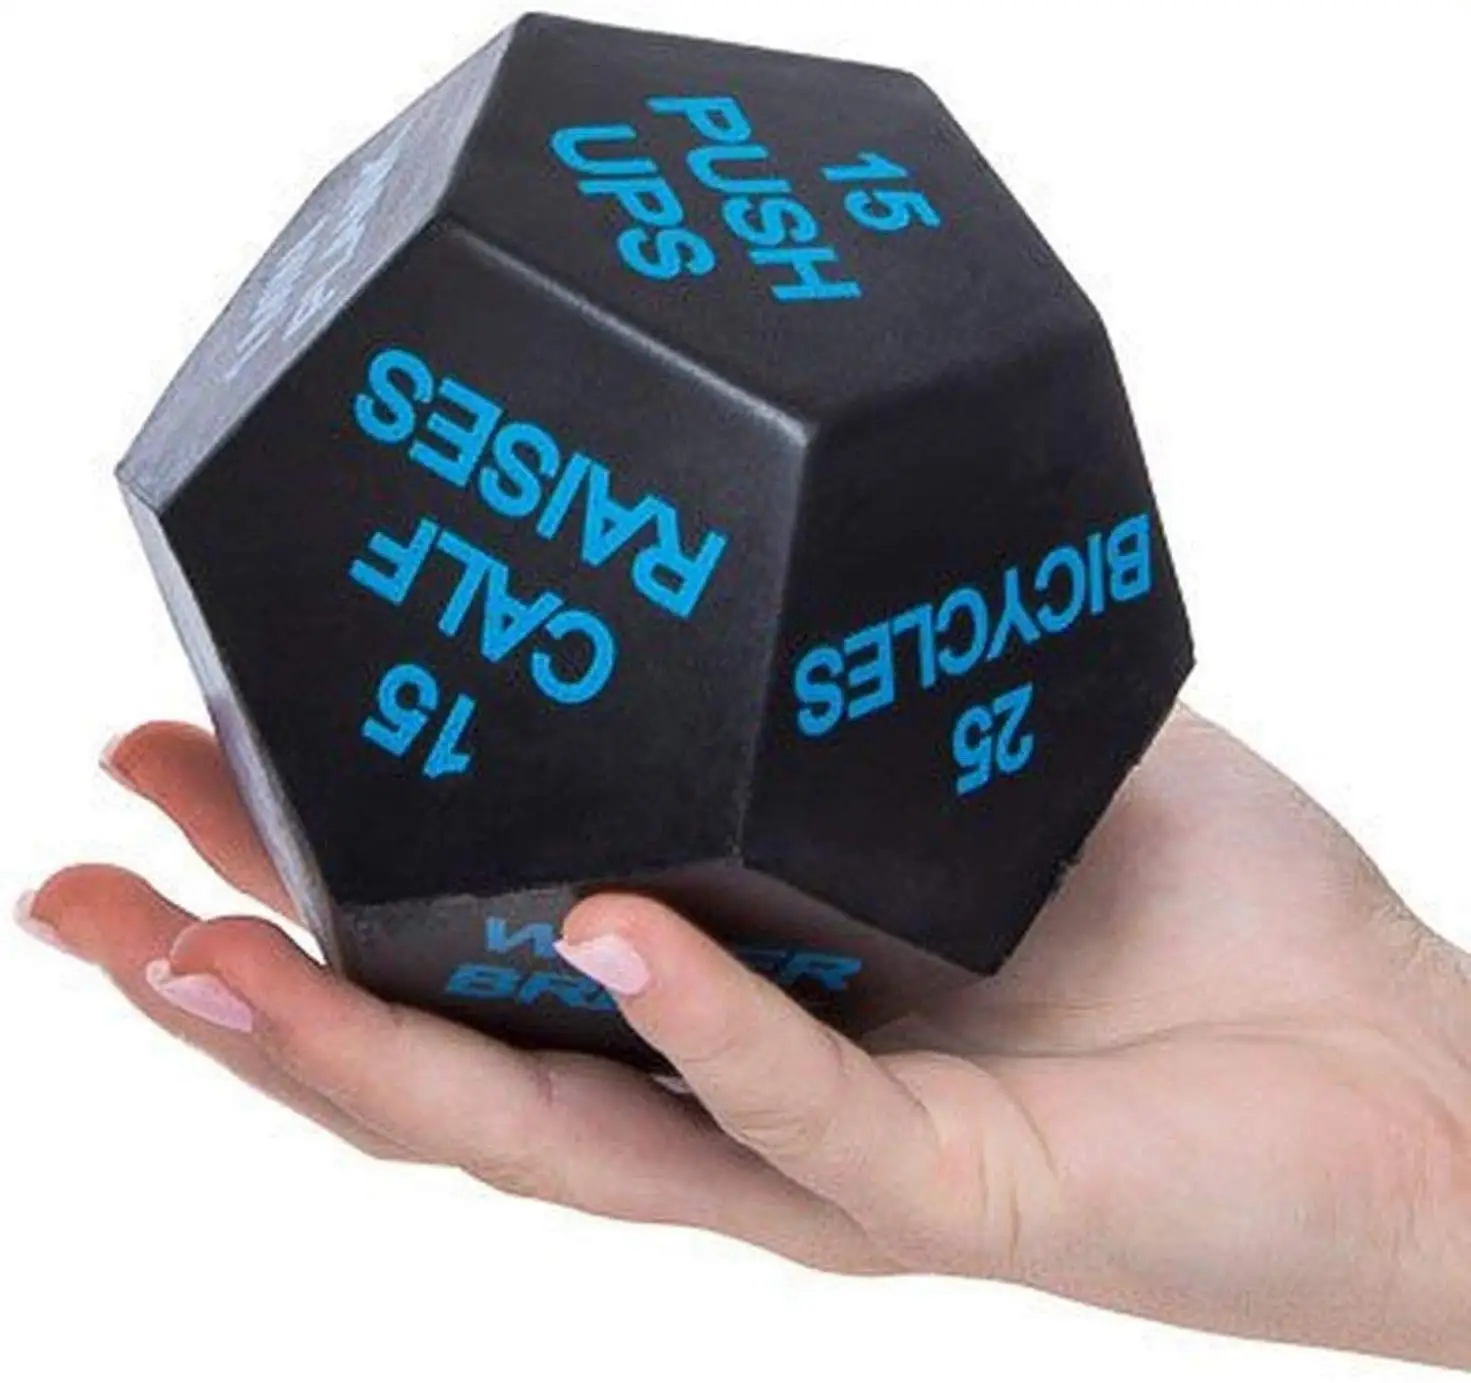 

12-Sided Yoga DICE 4IN. X 4IN, Sports Dice for Exercise, Yoga, and Fitness